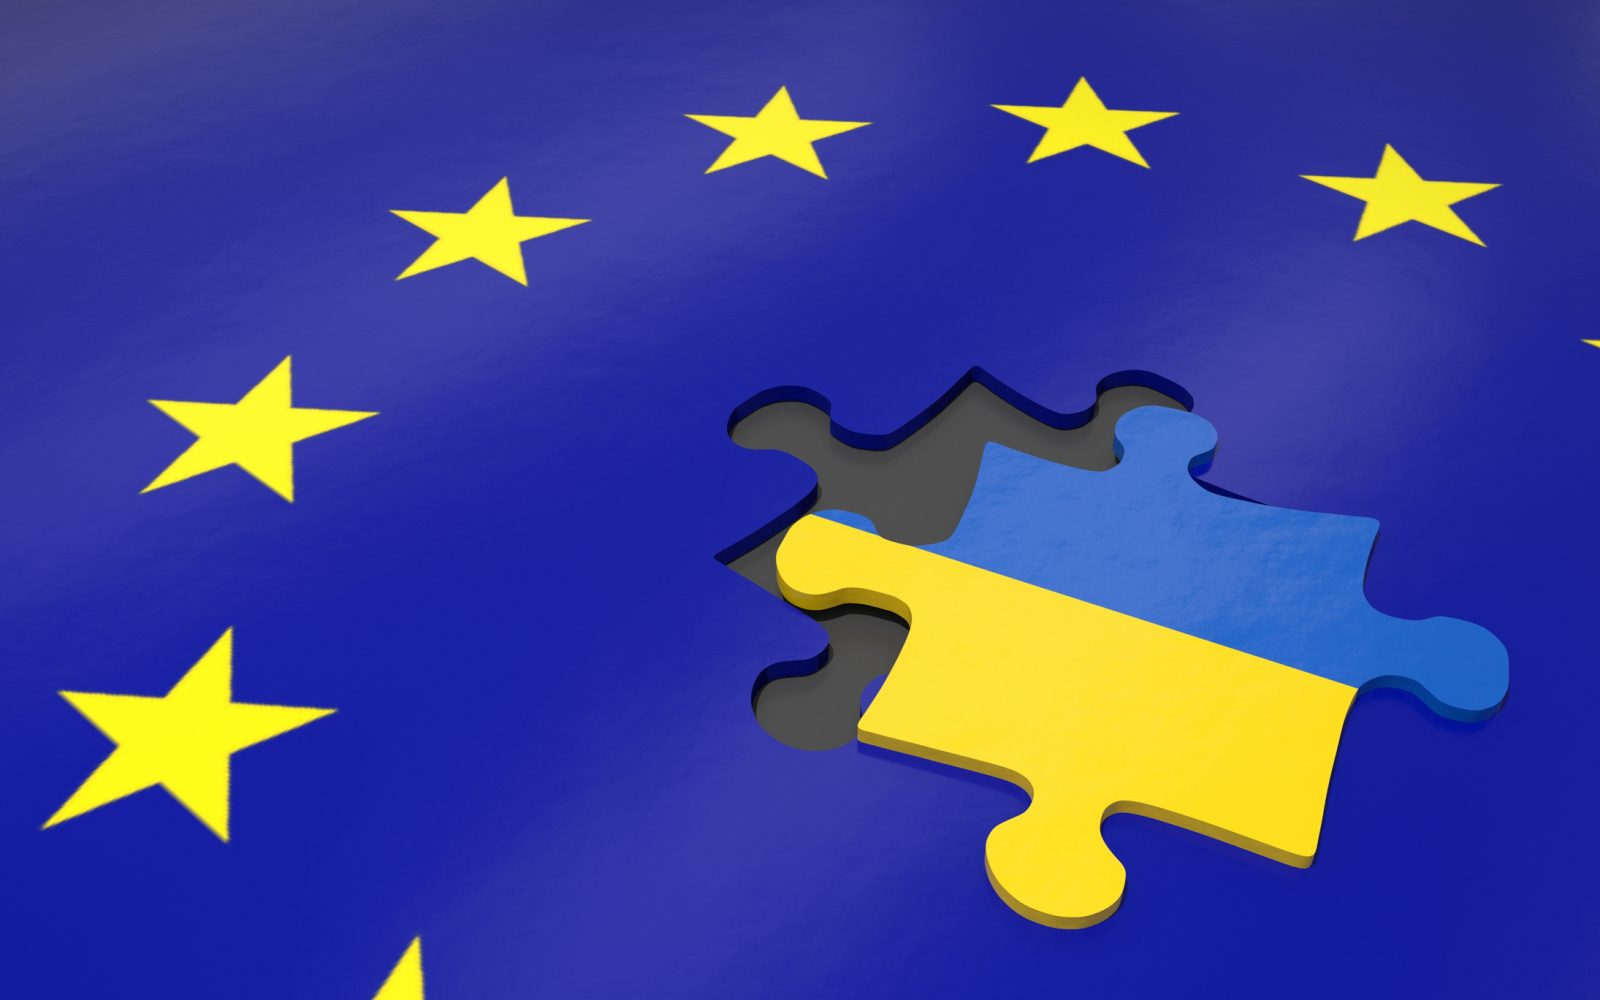 A puzzle piece marked with the blue and yellow Ukraine national flag sits out of place on a graphic of the European Union flag, a circle of yellow stars on a dark blue ground.